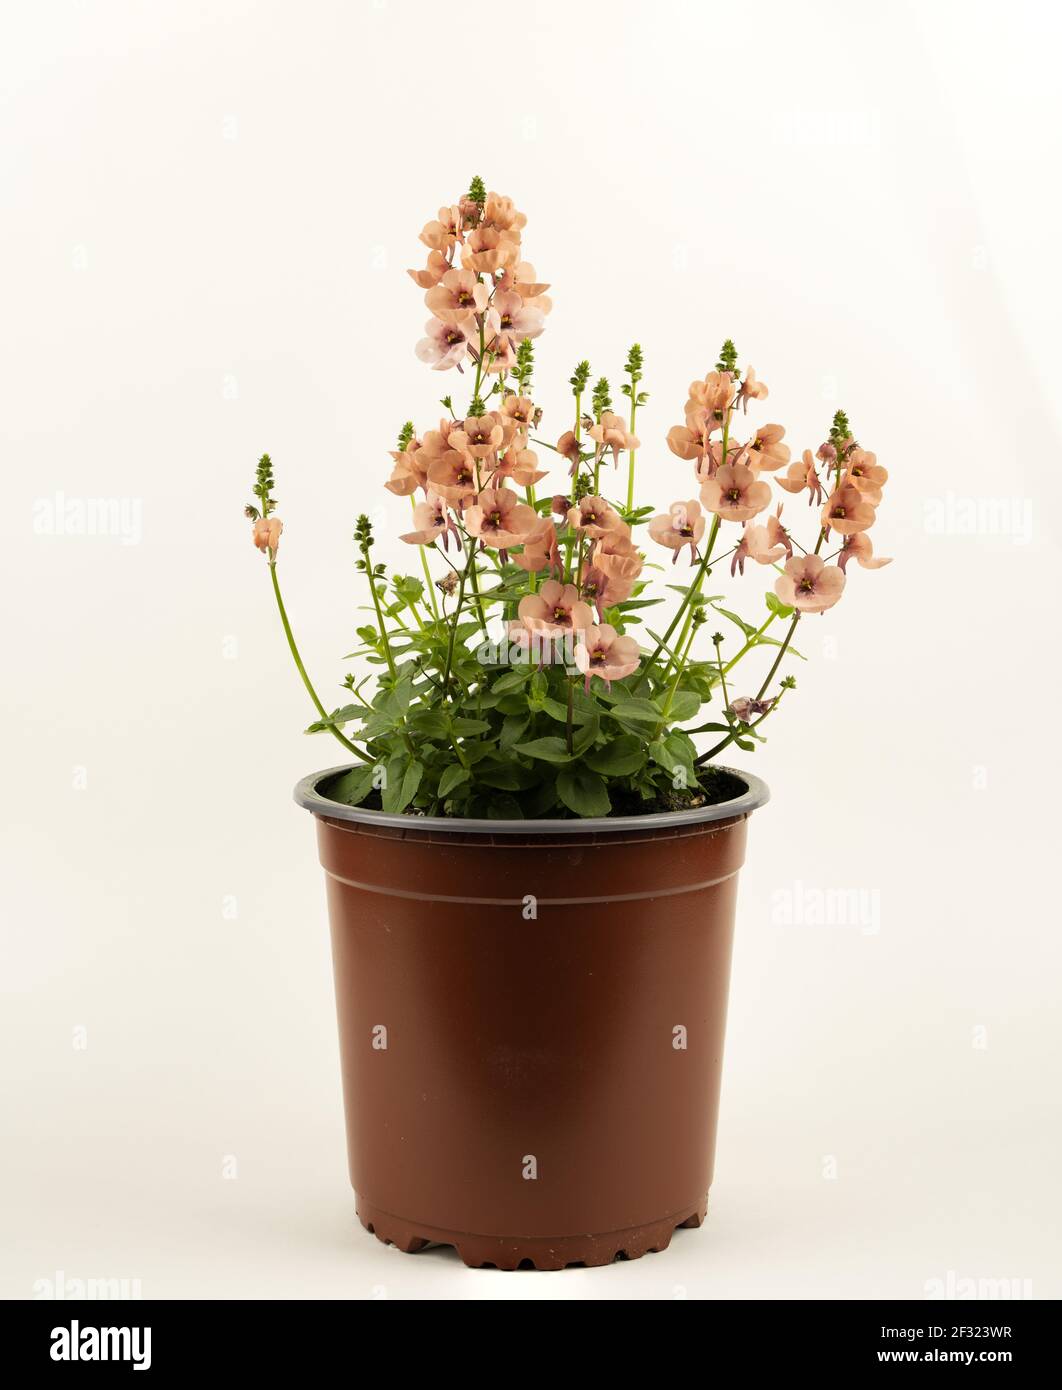 diascia rigescens in pot with white background Stock Photo